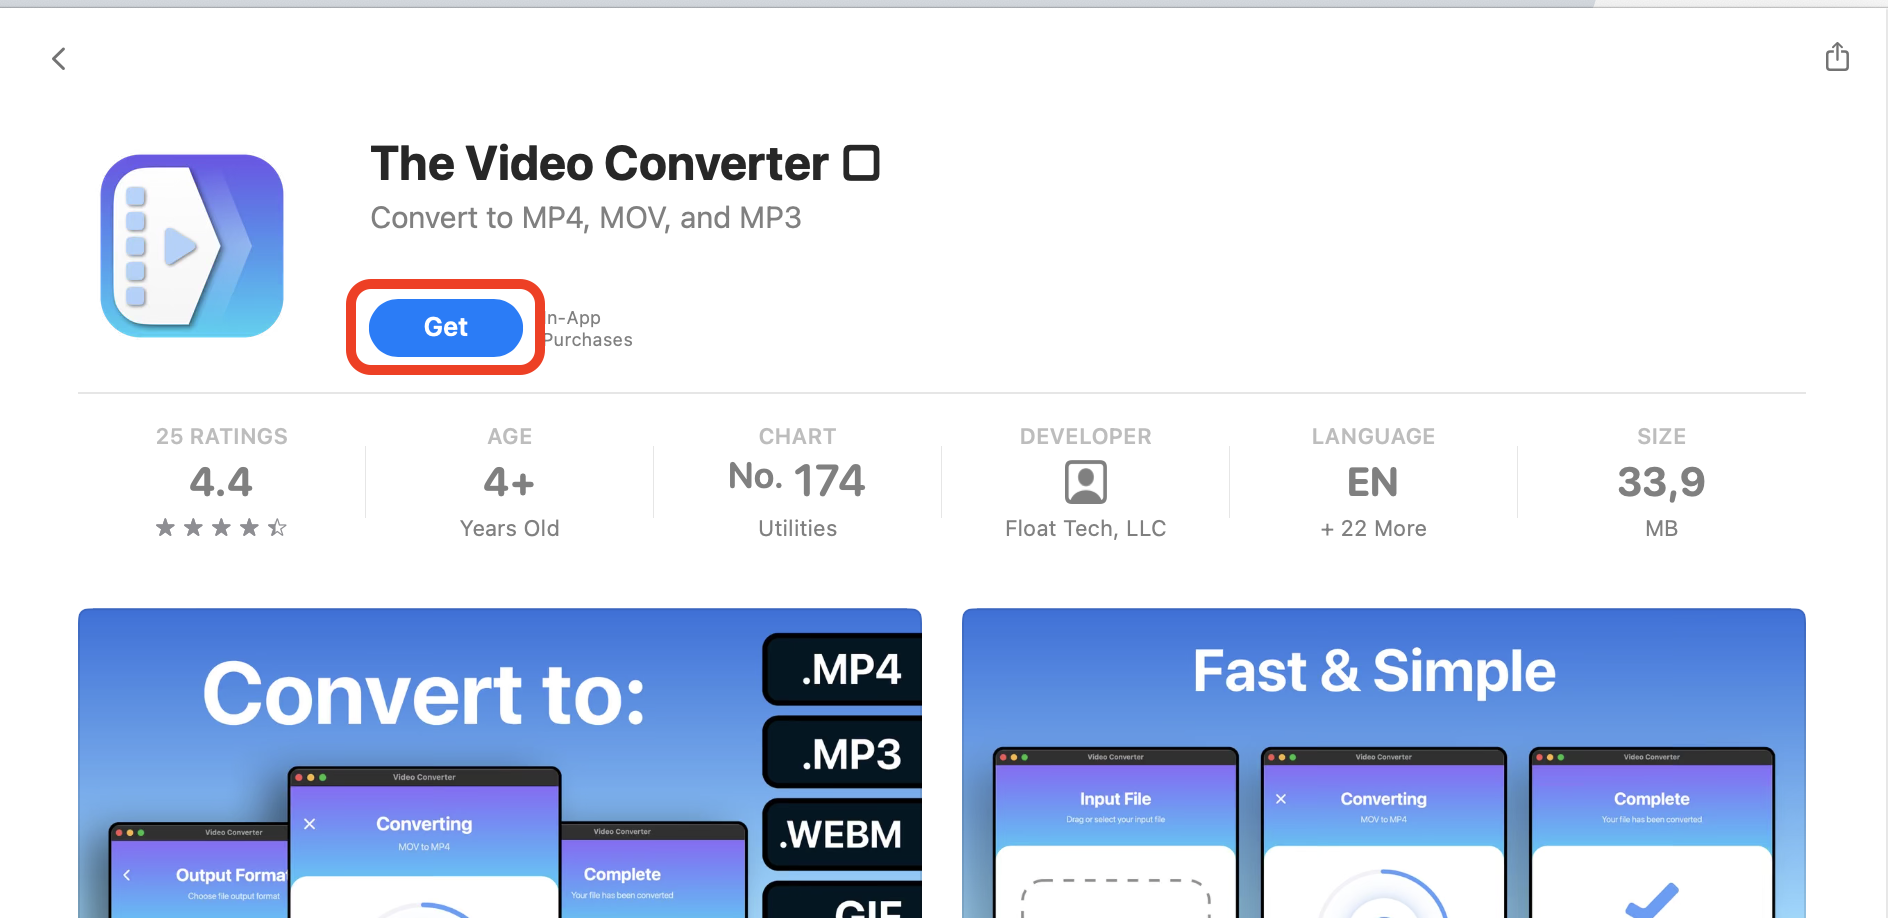 How to Convert 3GP to MP4 in Mac: Step 1